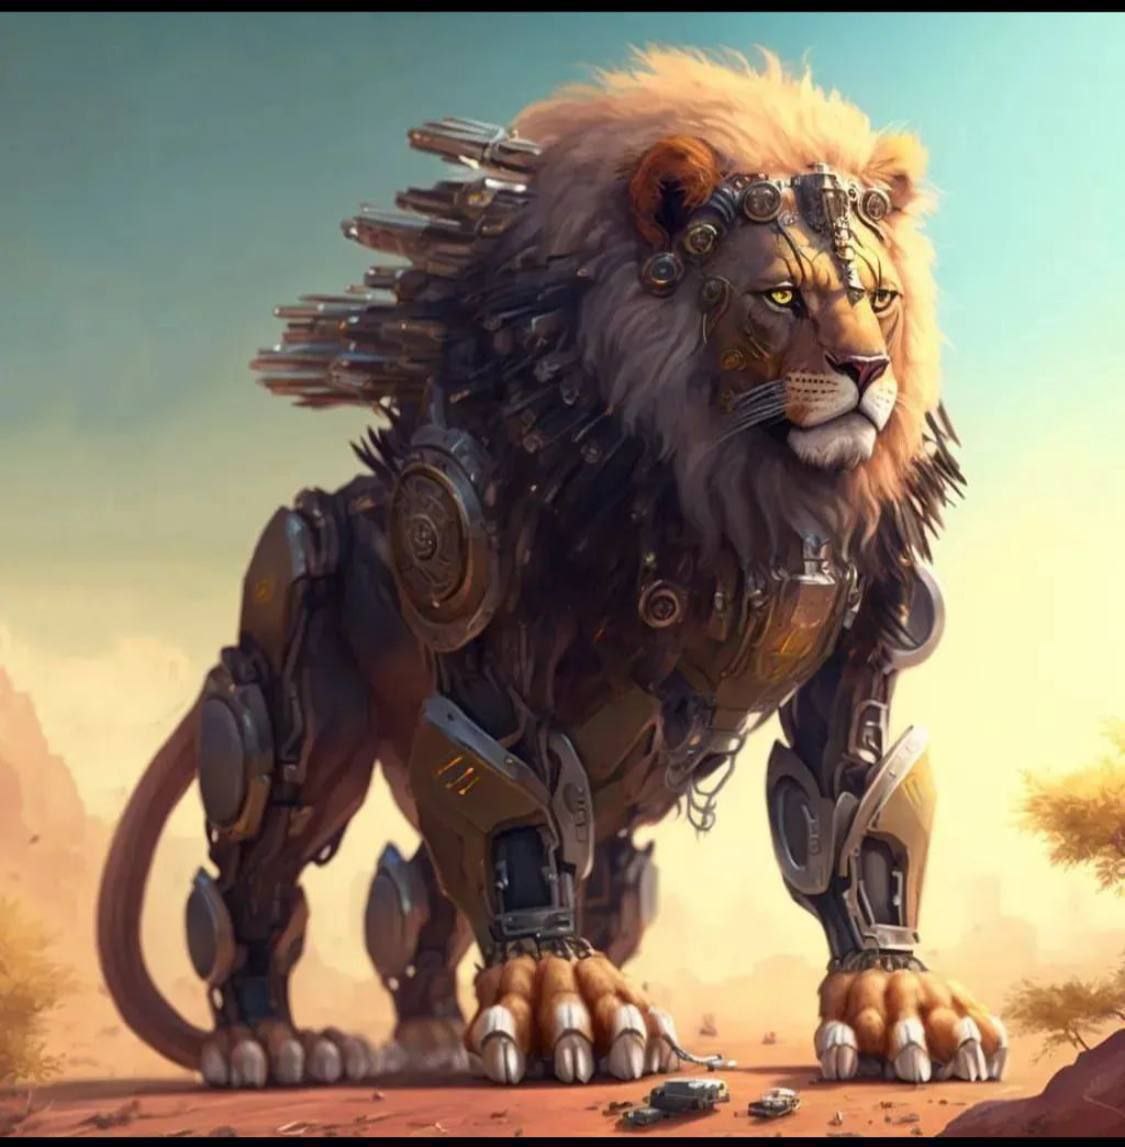 💎NEW GEM🚨

Lion is the king of all animals, then BNBLION is the king of all gems 🦁👑

Listed on CMC ✅
No team-token ❌
100% Liquidity Locked and Contract Renounced 🔒
Strong community 💪💪

57.24℅ burned 🔥
90℅ of supply will burn 🔥

CA:…